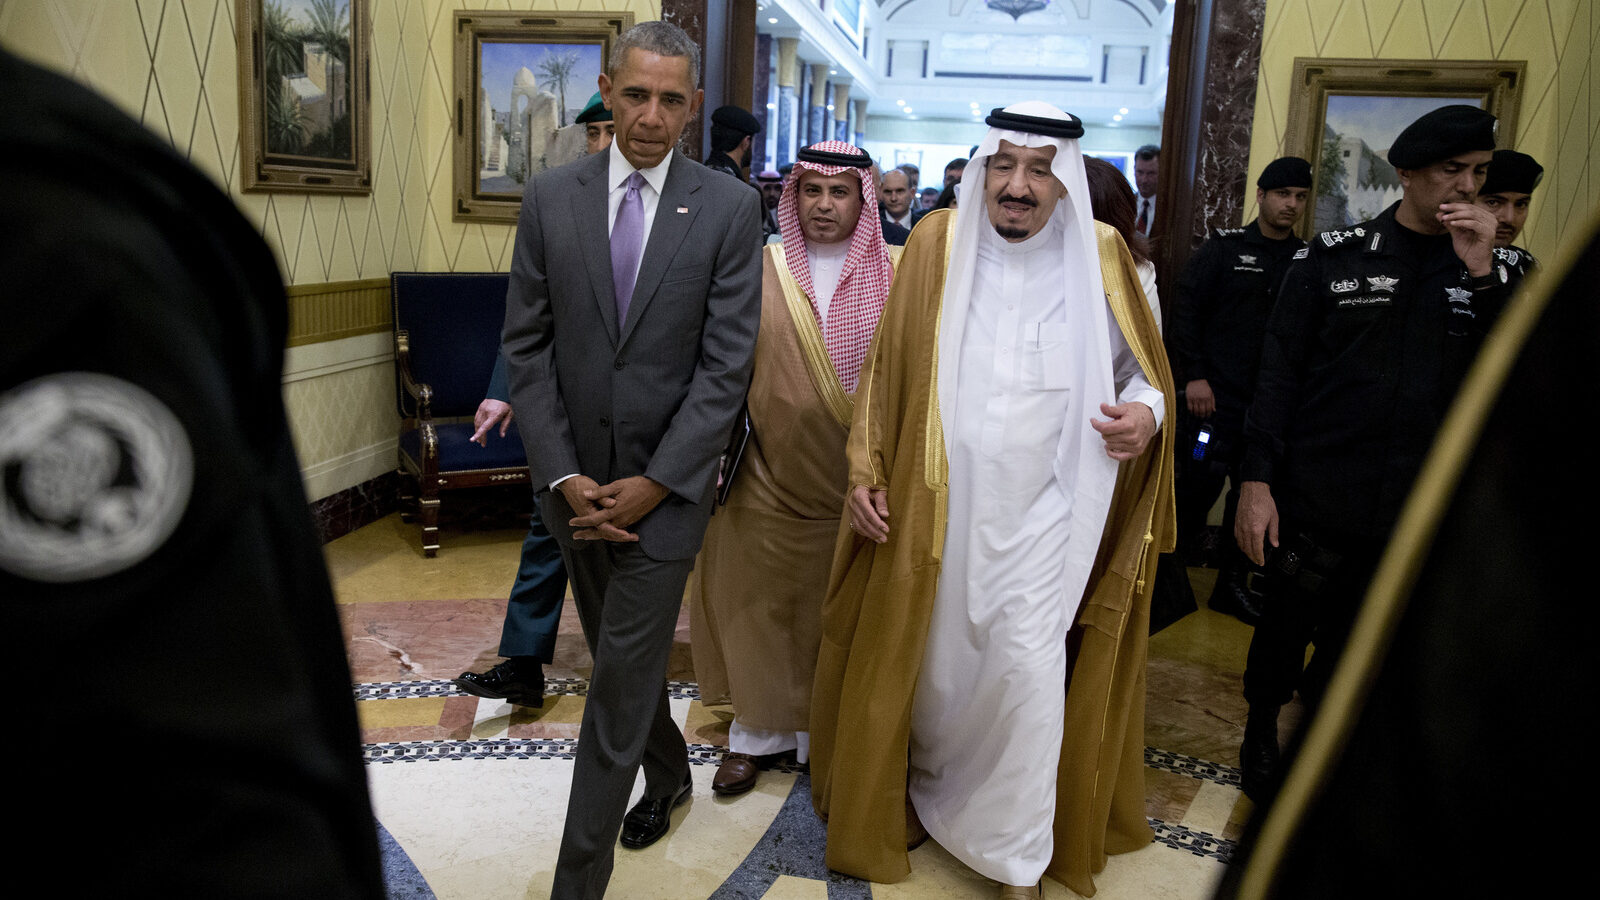 President Barack Obama and Saudi Arabia's King Salman walk together to a meeting at Erga Palace in Riyadh, Saudi Arabia, Wednesday, April 20, 2016. The President begins a six day trip to strategize with his counterparts in Saudi Arabia, England and Germany on a broad range of issues with efforts to rein in the Islamic State group being the common denominator in all three stops. (AP Photo/Carolyn Kaster)